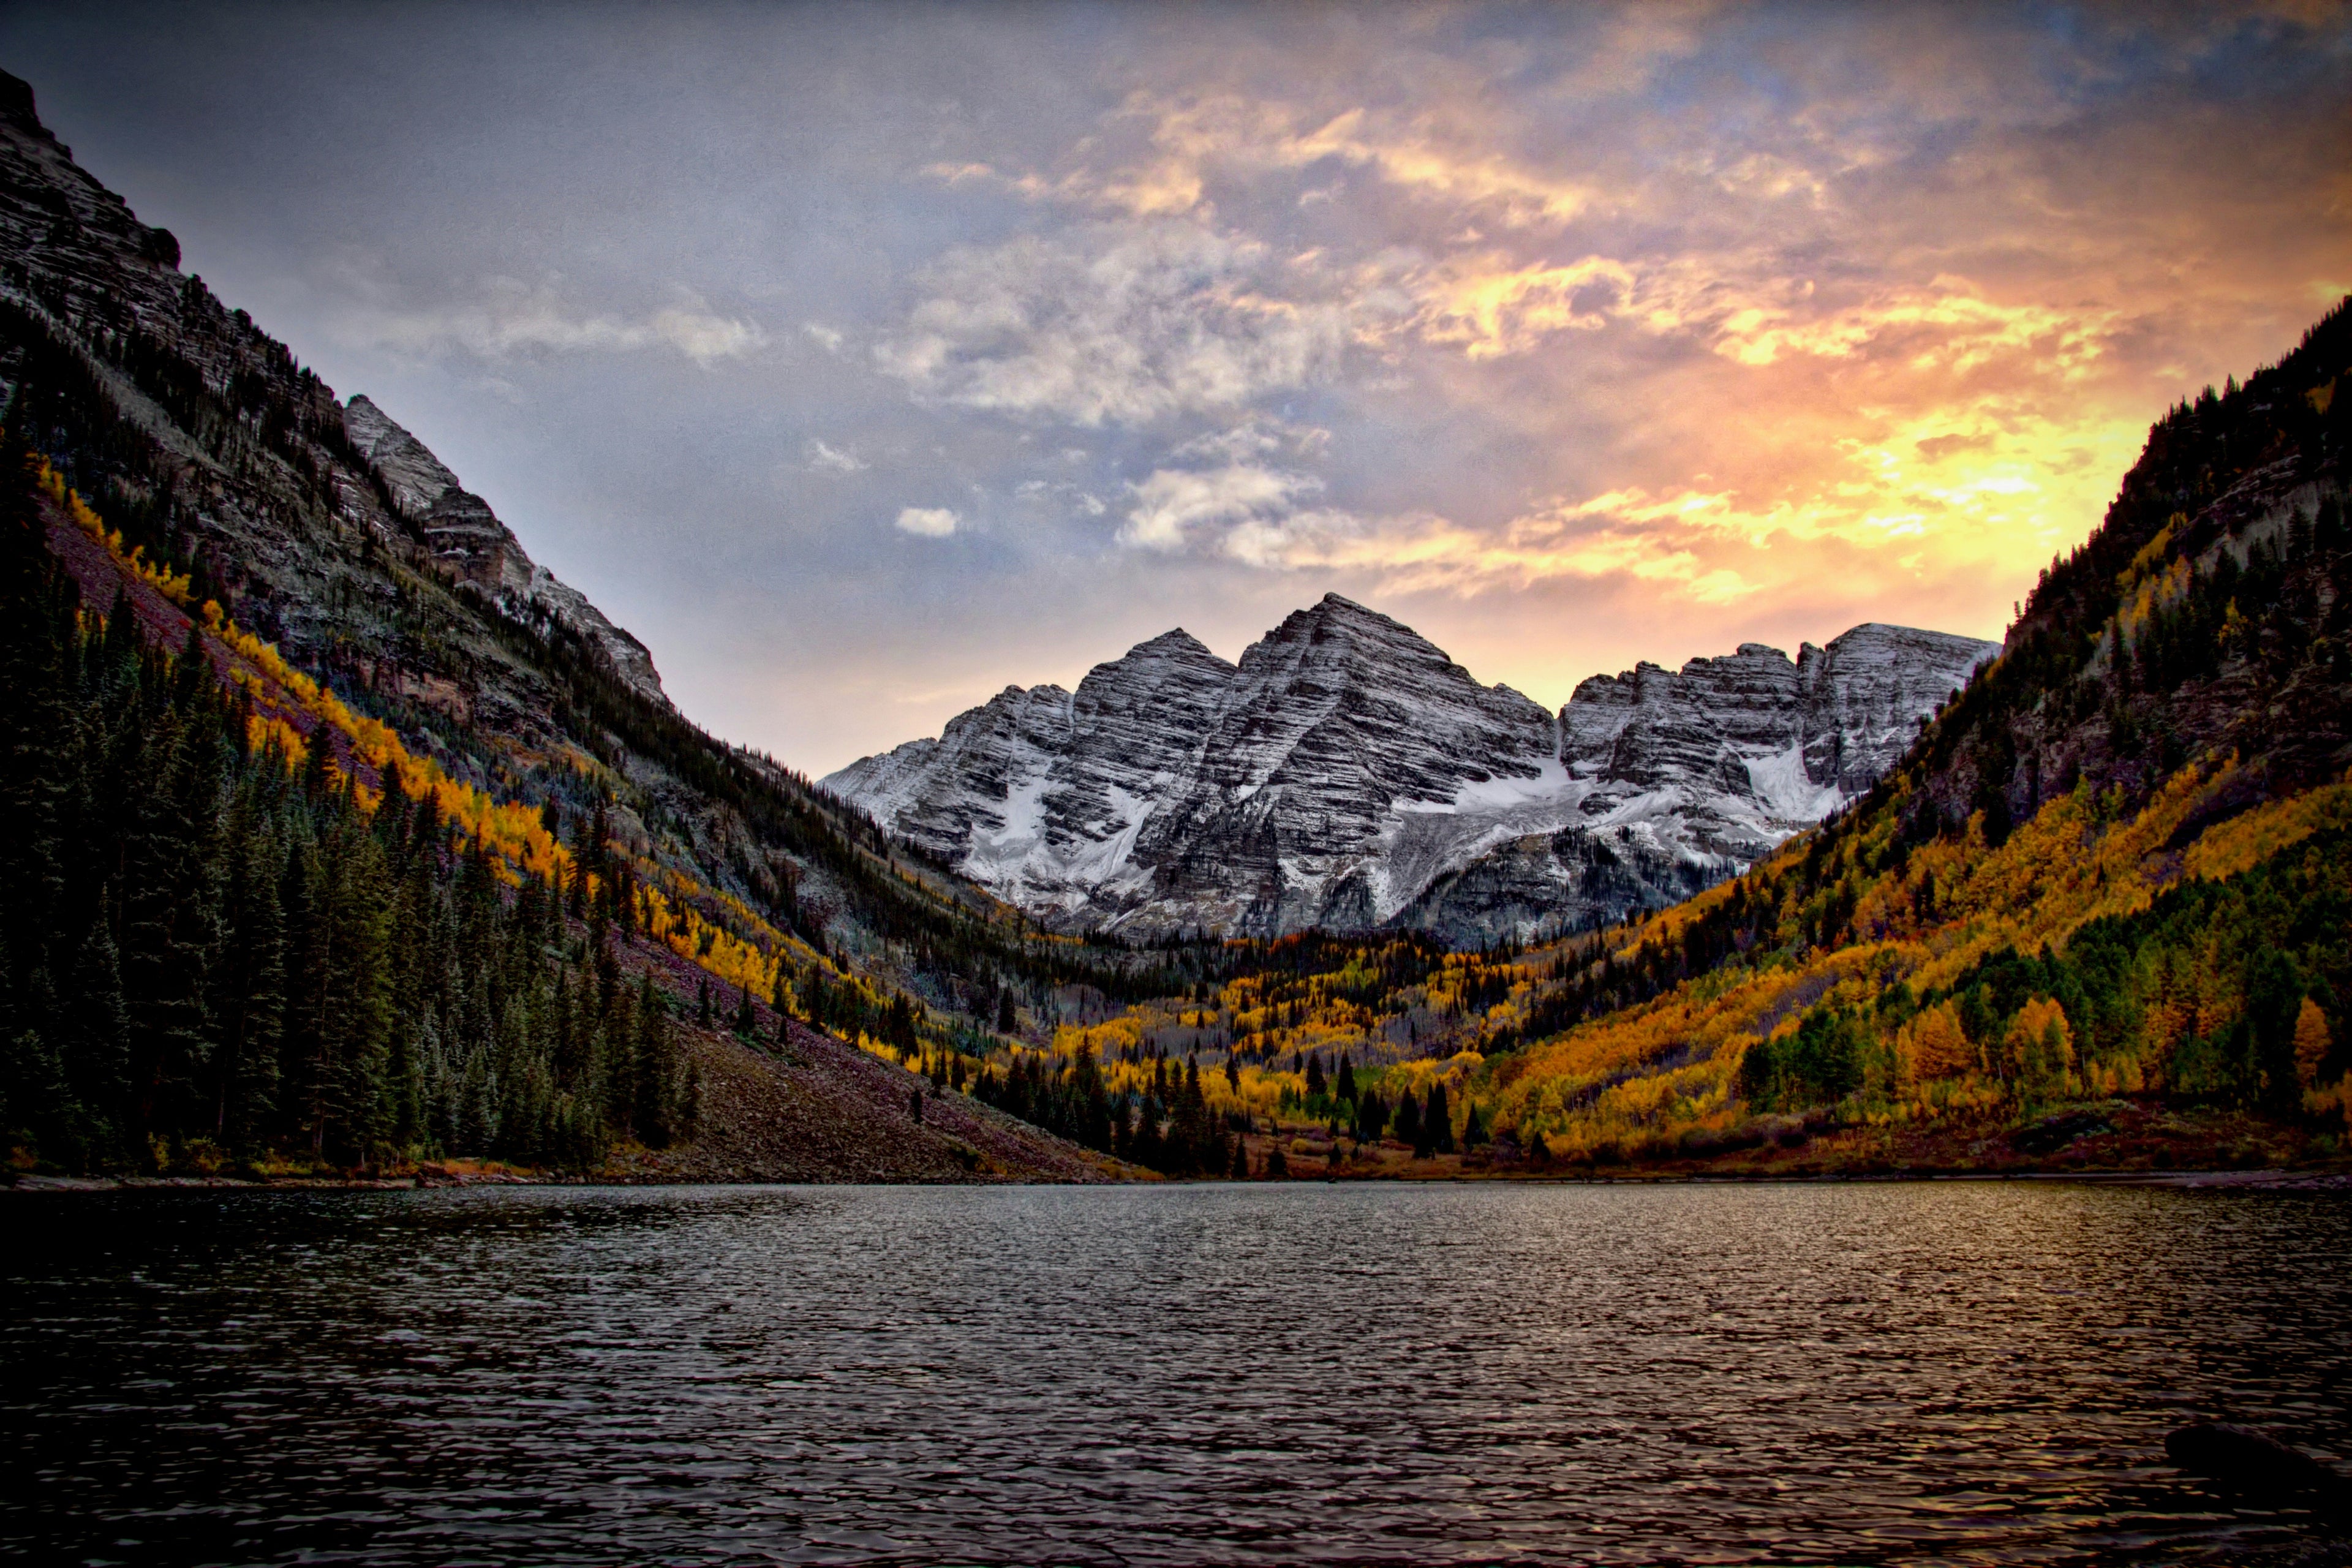 Maroon Bells Summit in Colorado during a sunset